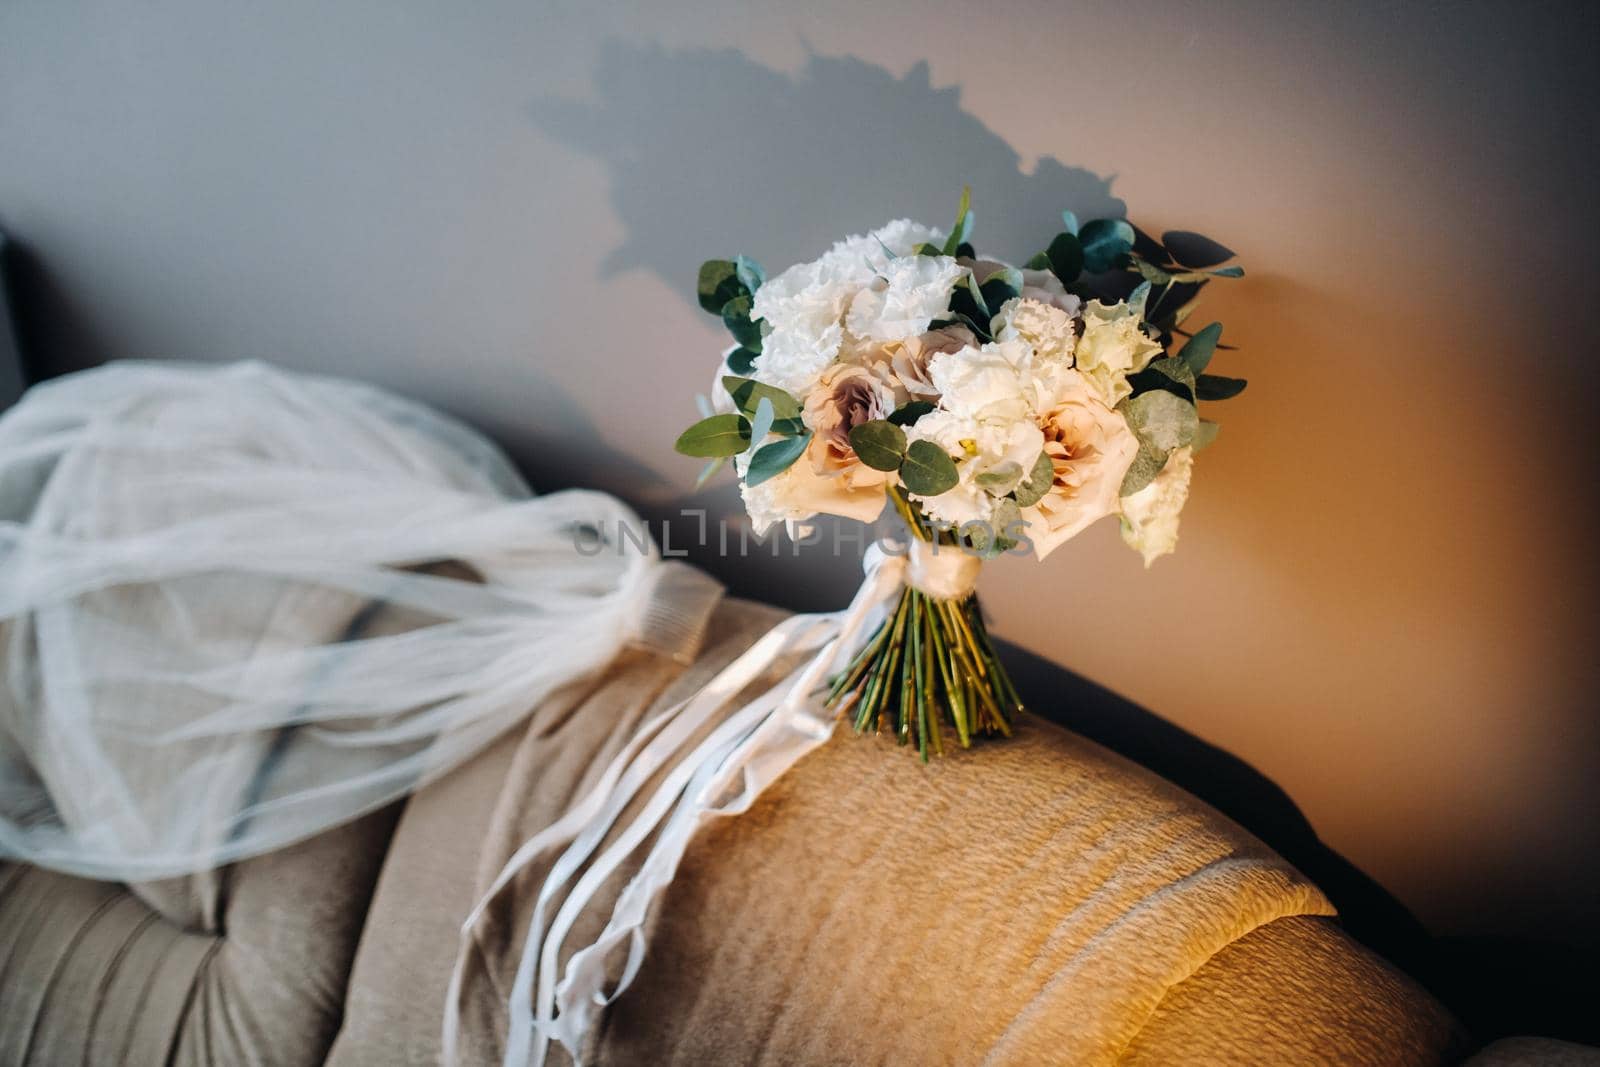 wedding bouquet with roses on a chair and boutonniere.The decor at the wedding.